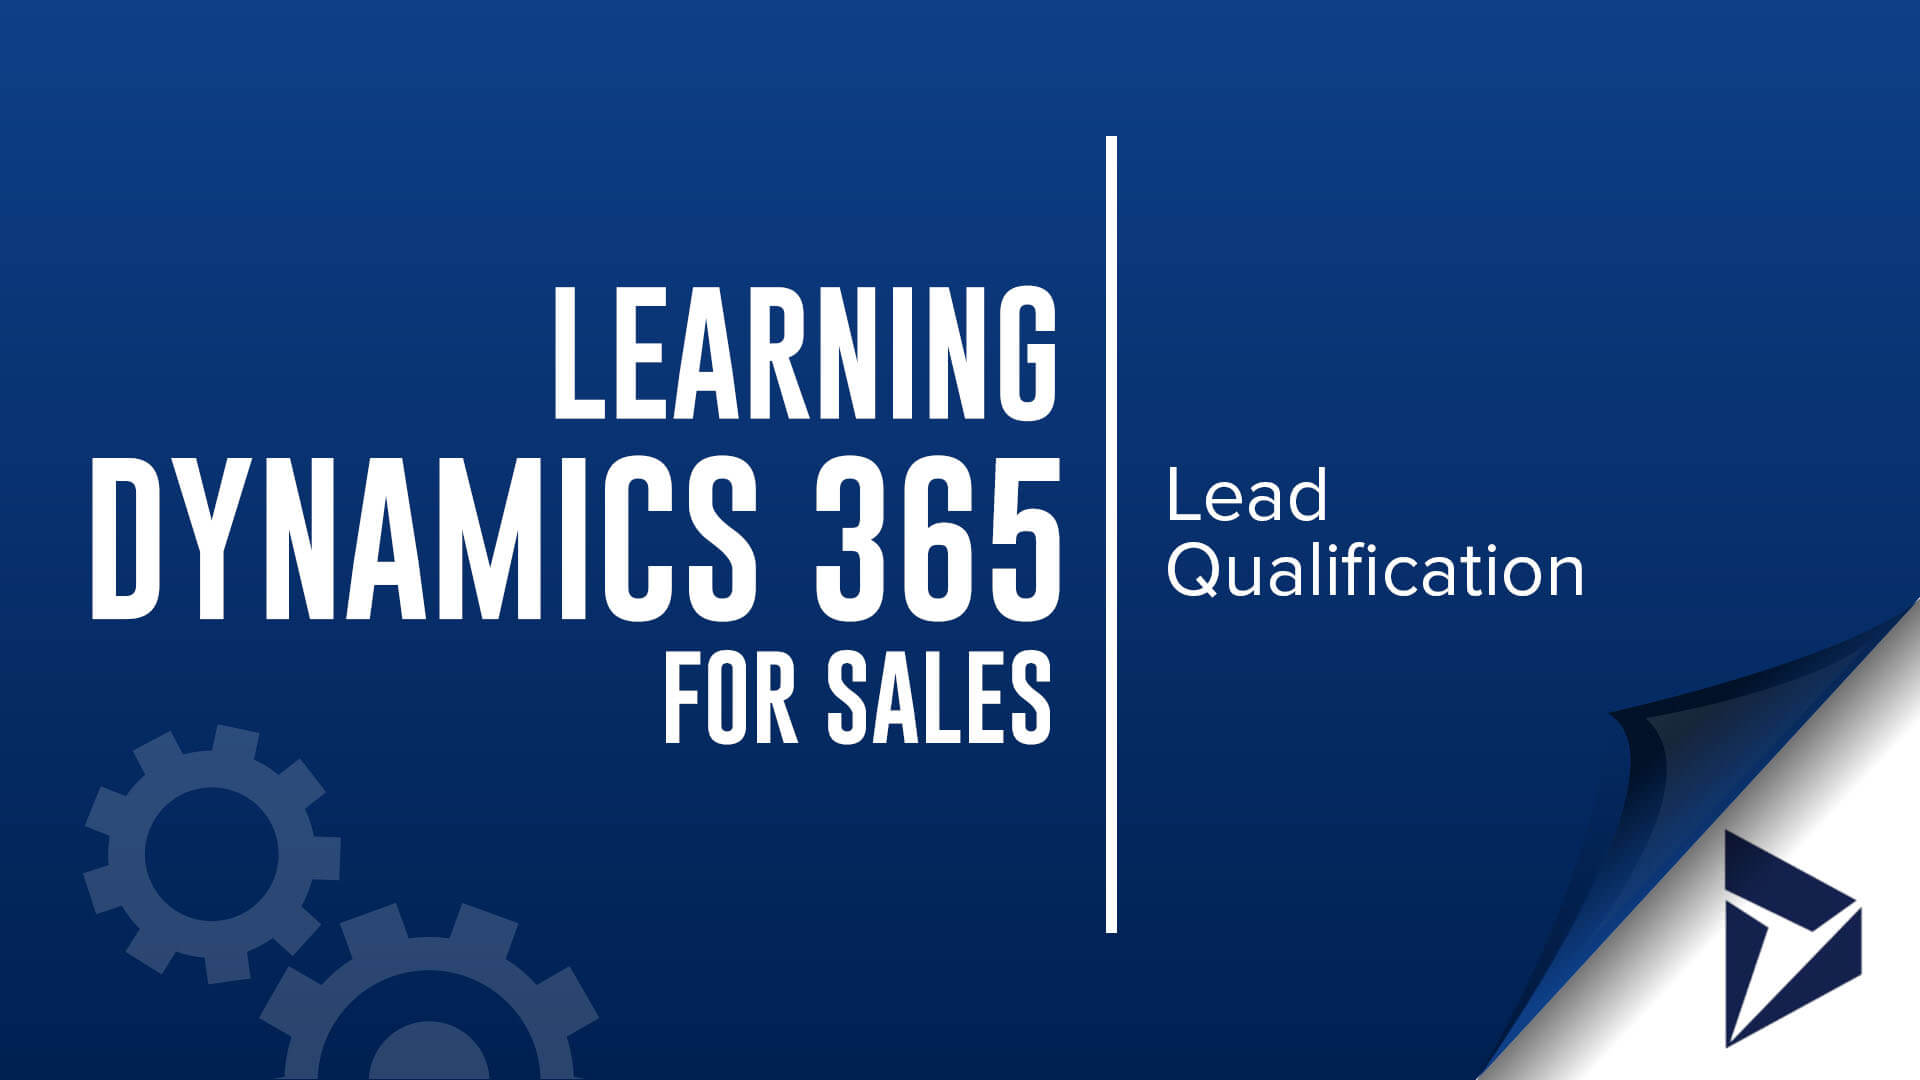 learn Dynamics 365 for Sales - lead qualification